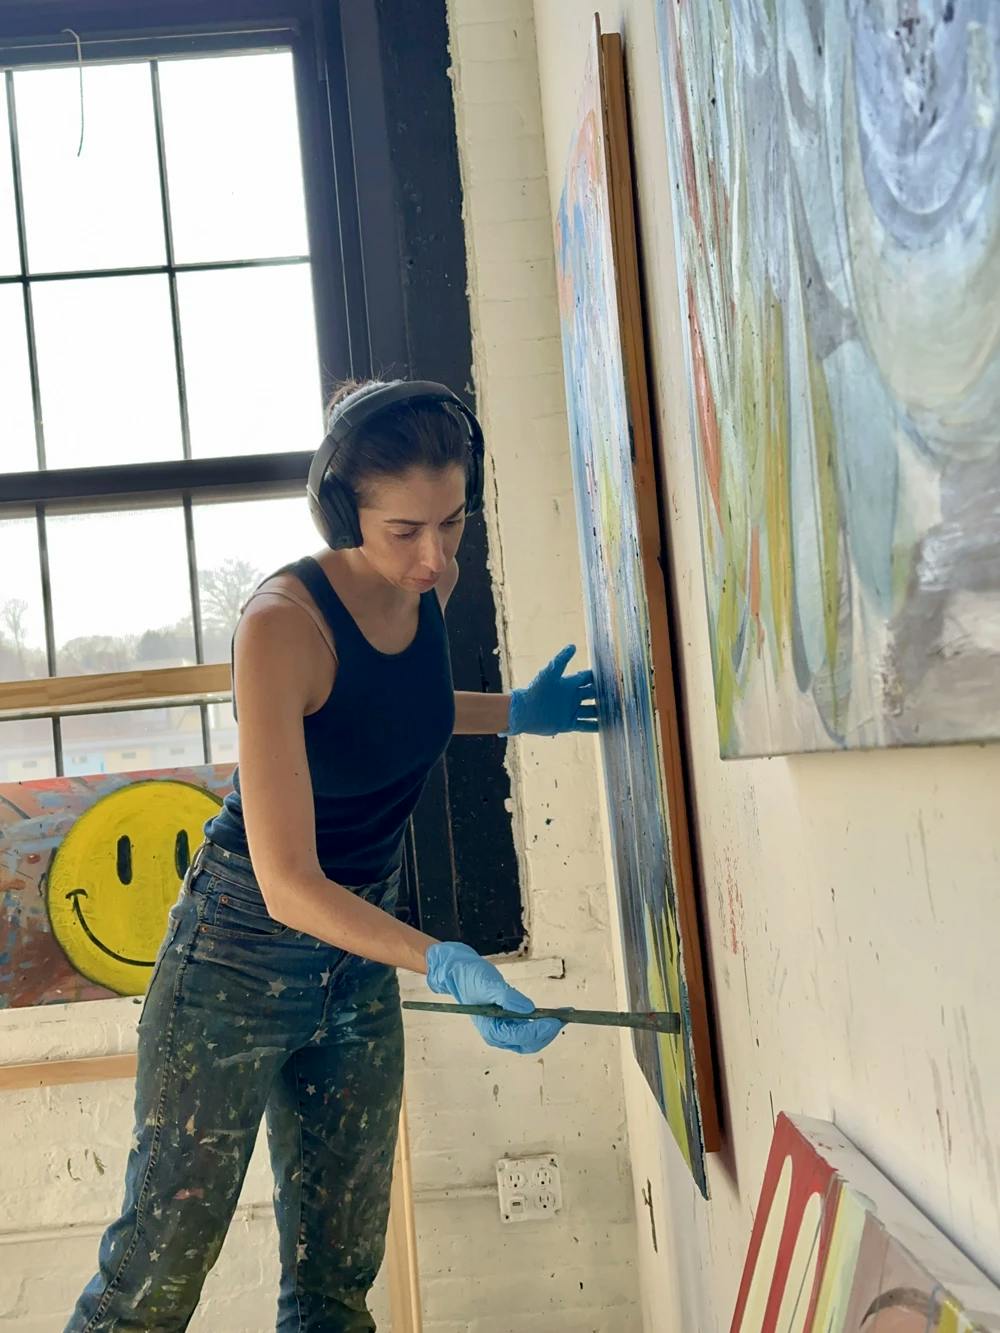 Artist Diana Delgado wearing headphones and wearing plastic blue gloves while painting a large, abstract work.